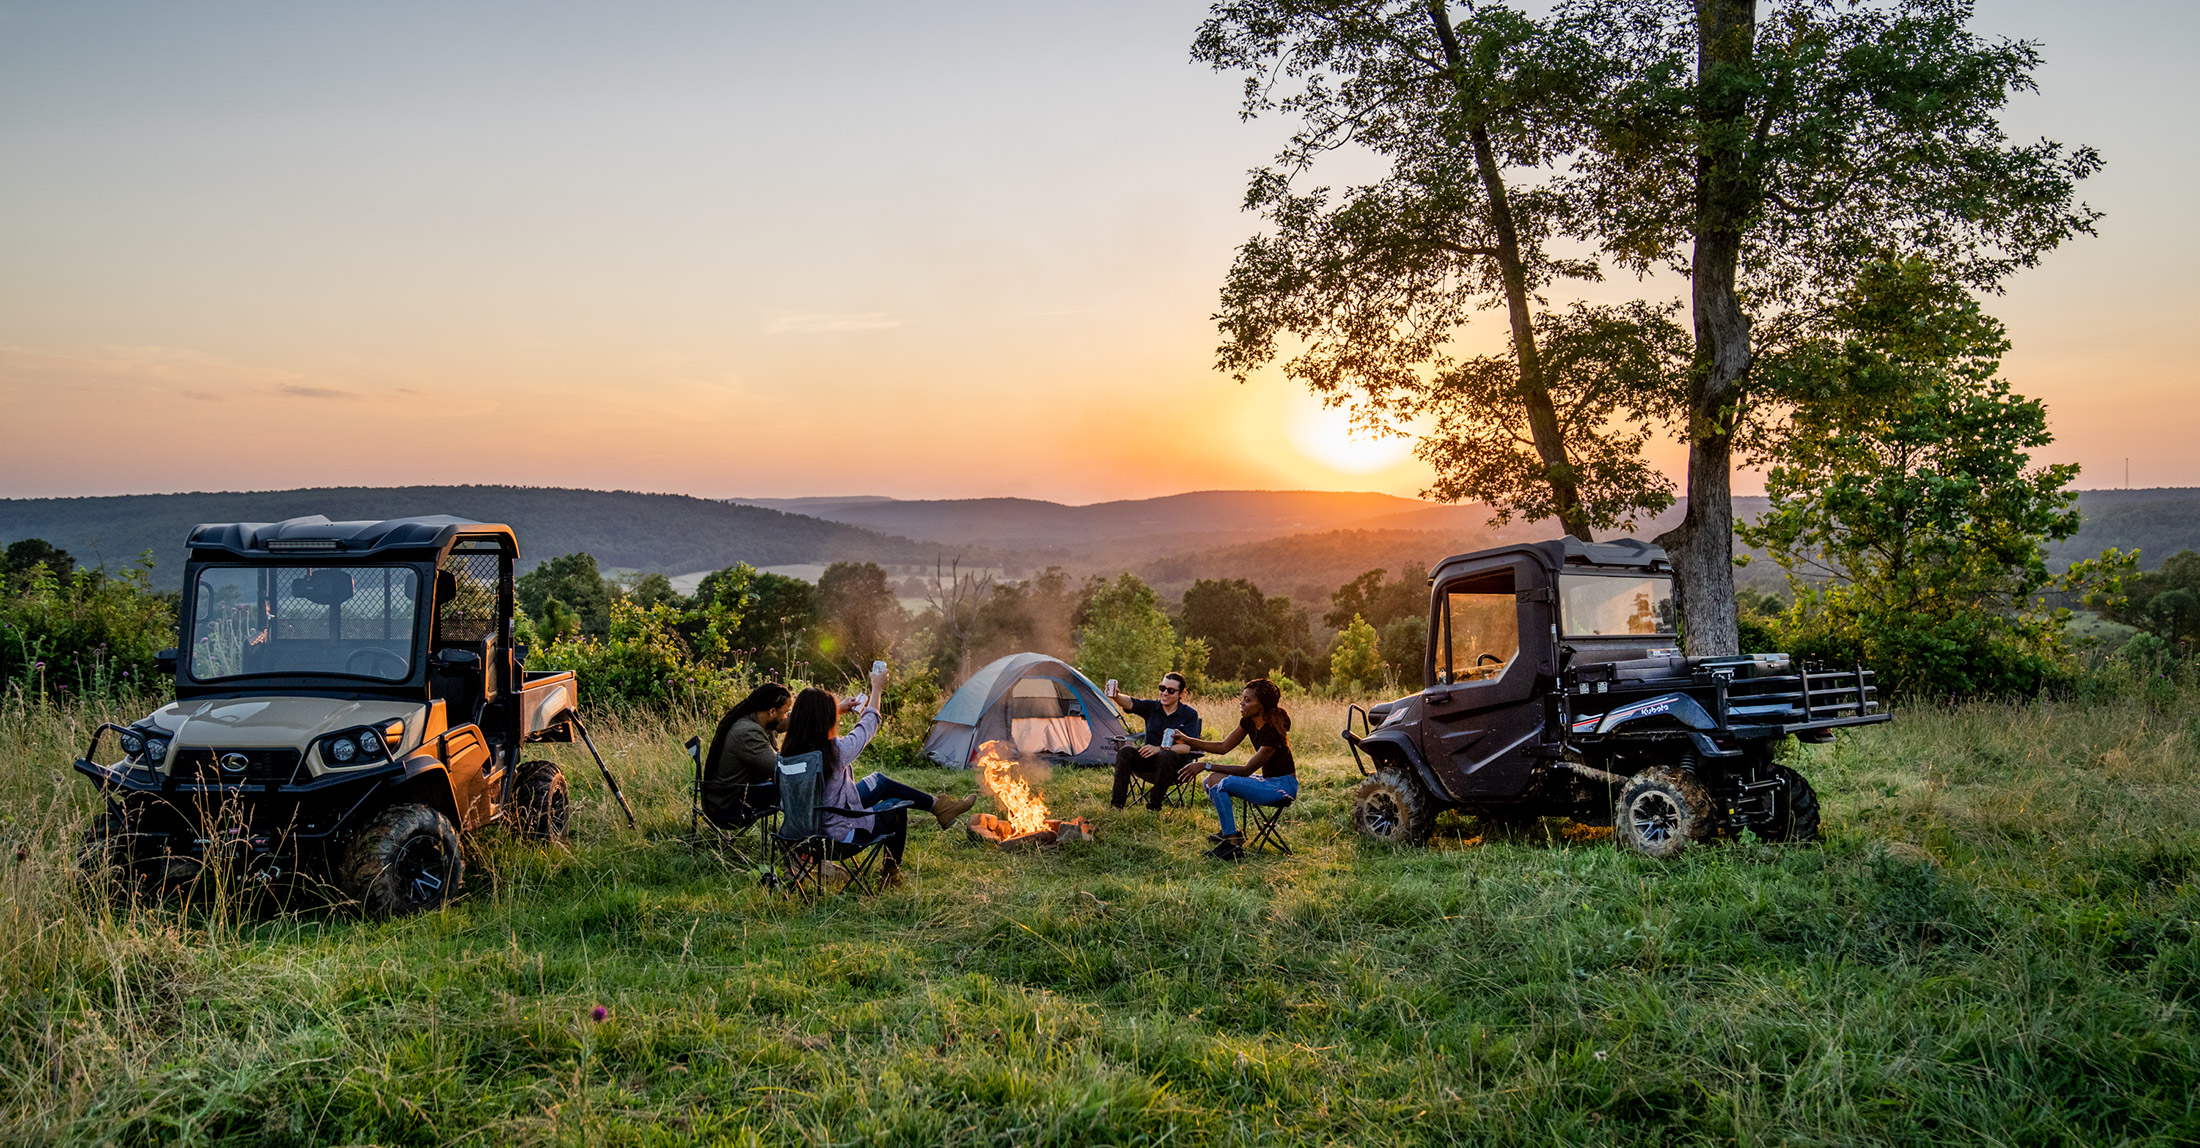 Sunset Campsite with ATVs